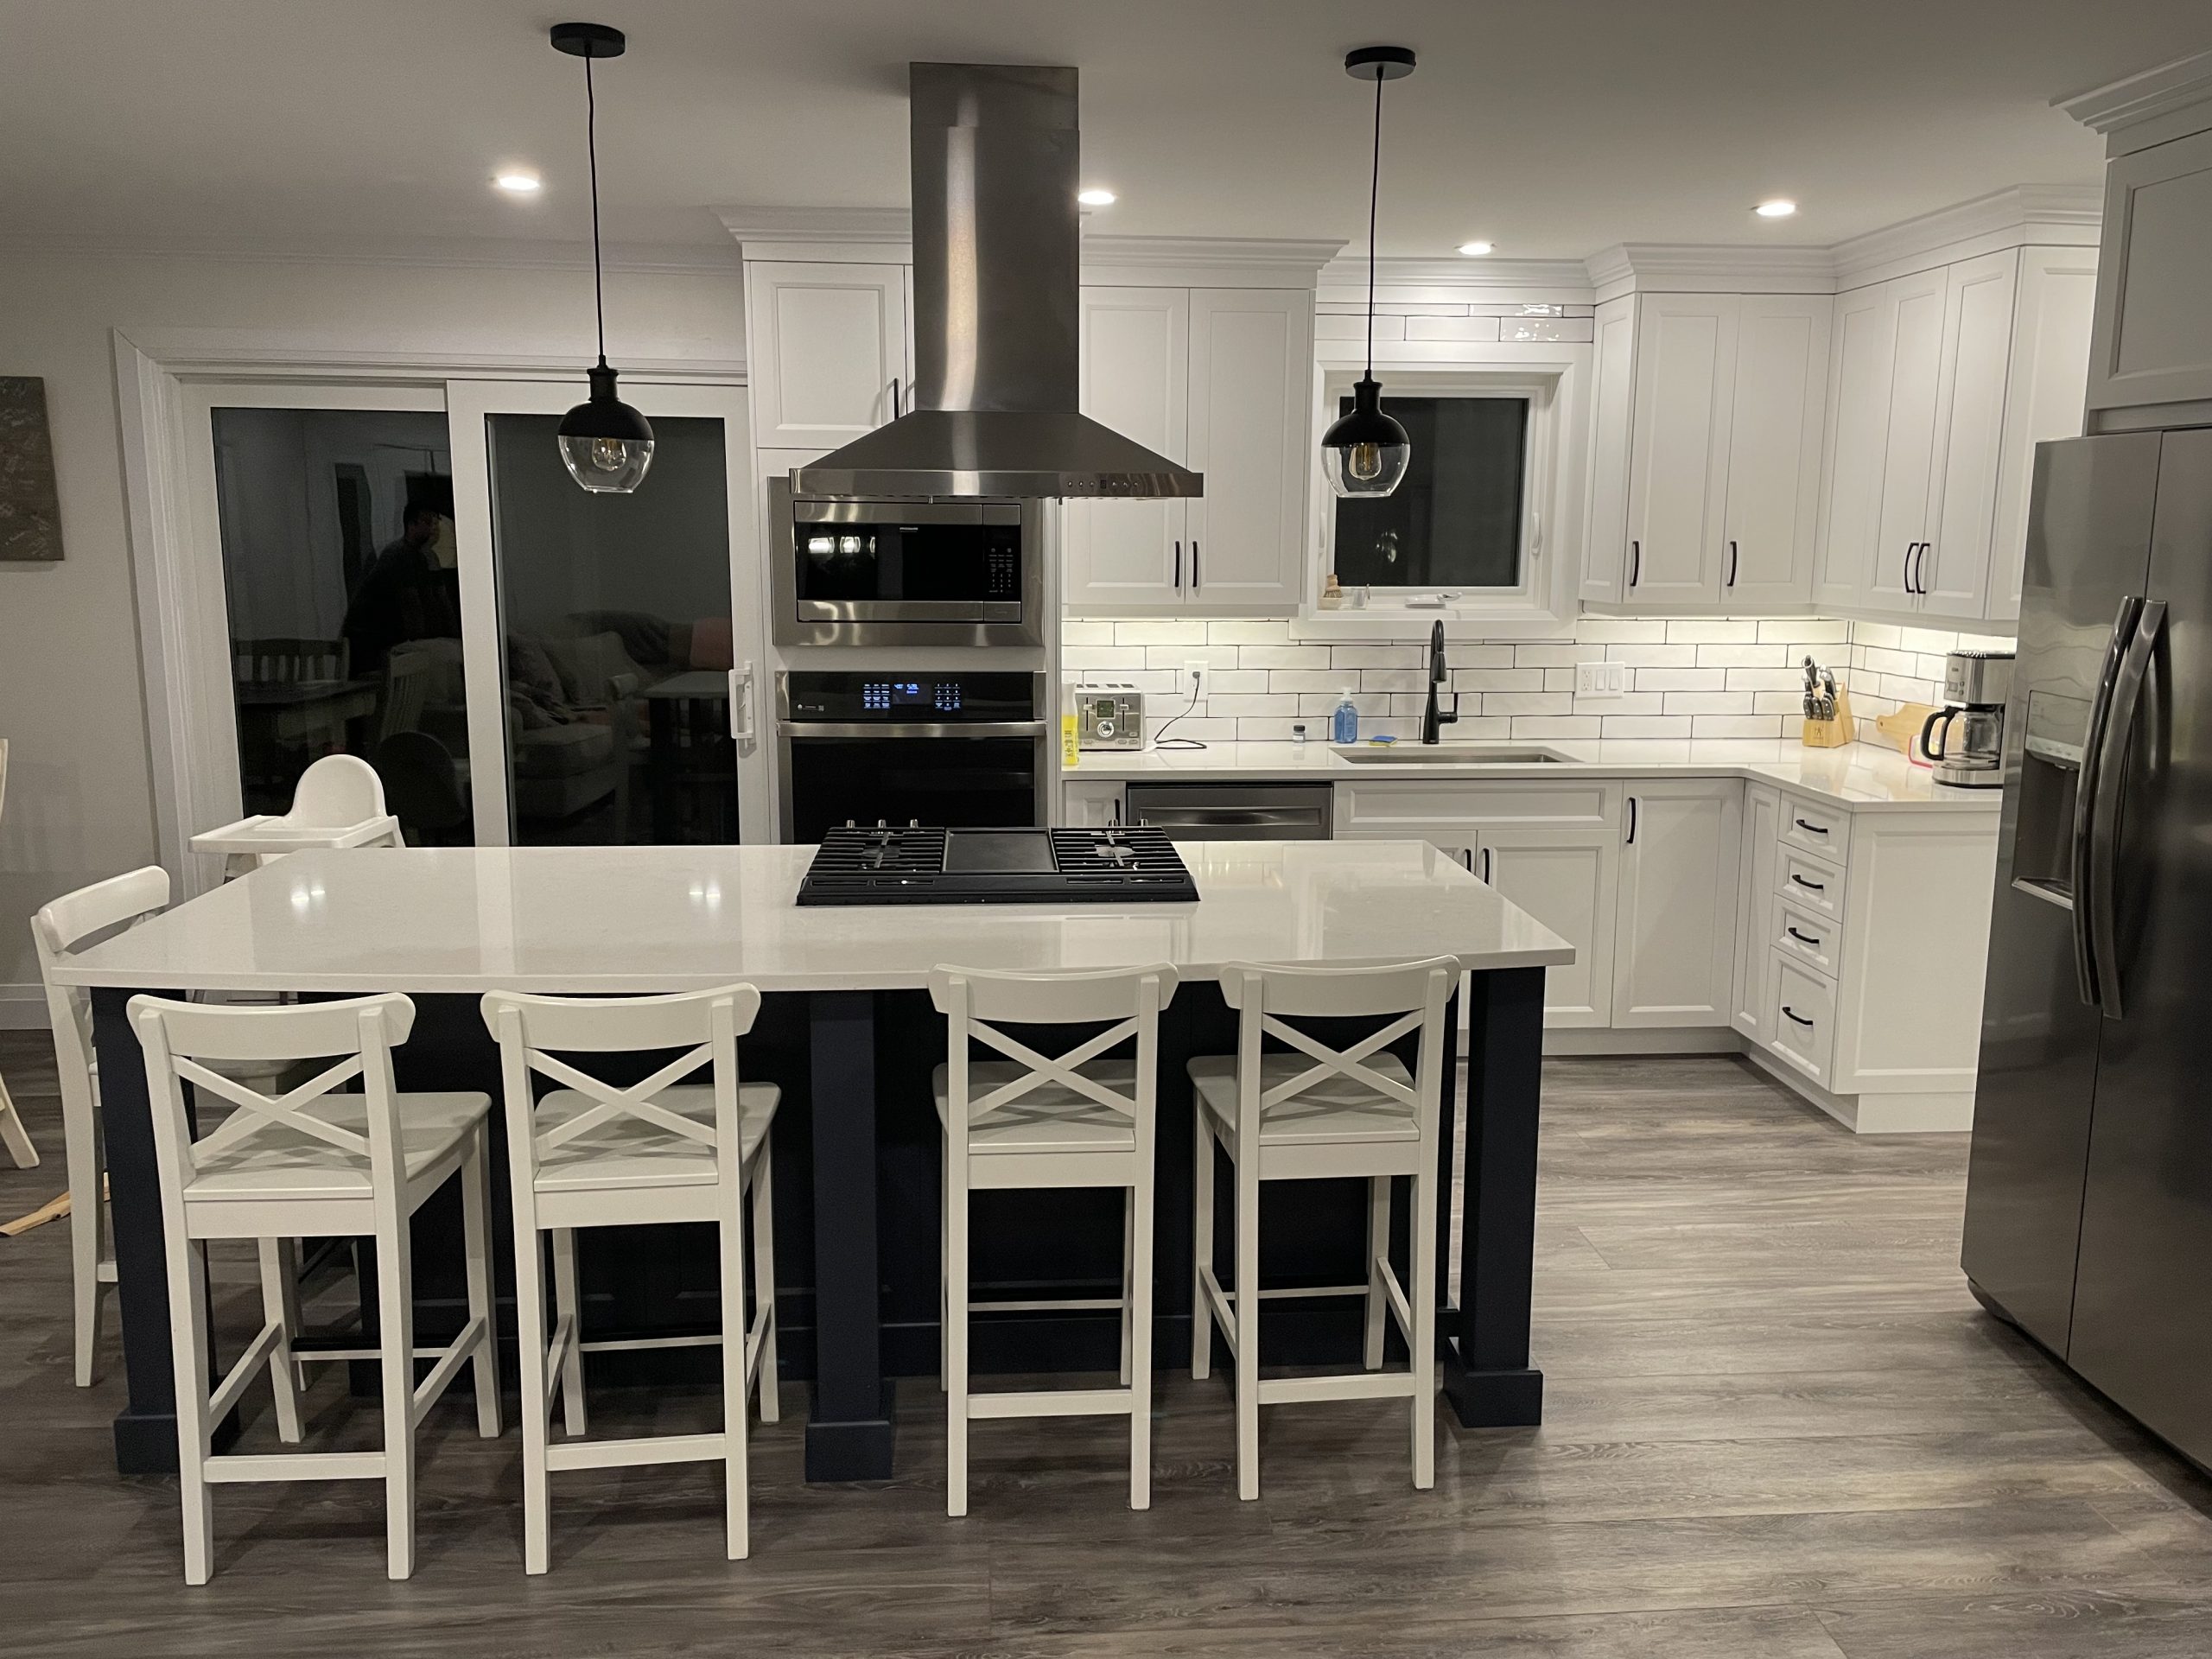 Beautiful overall view after full kitchen renovation with custom cabinetry by SSP Cabinetry